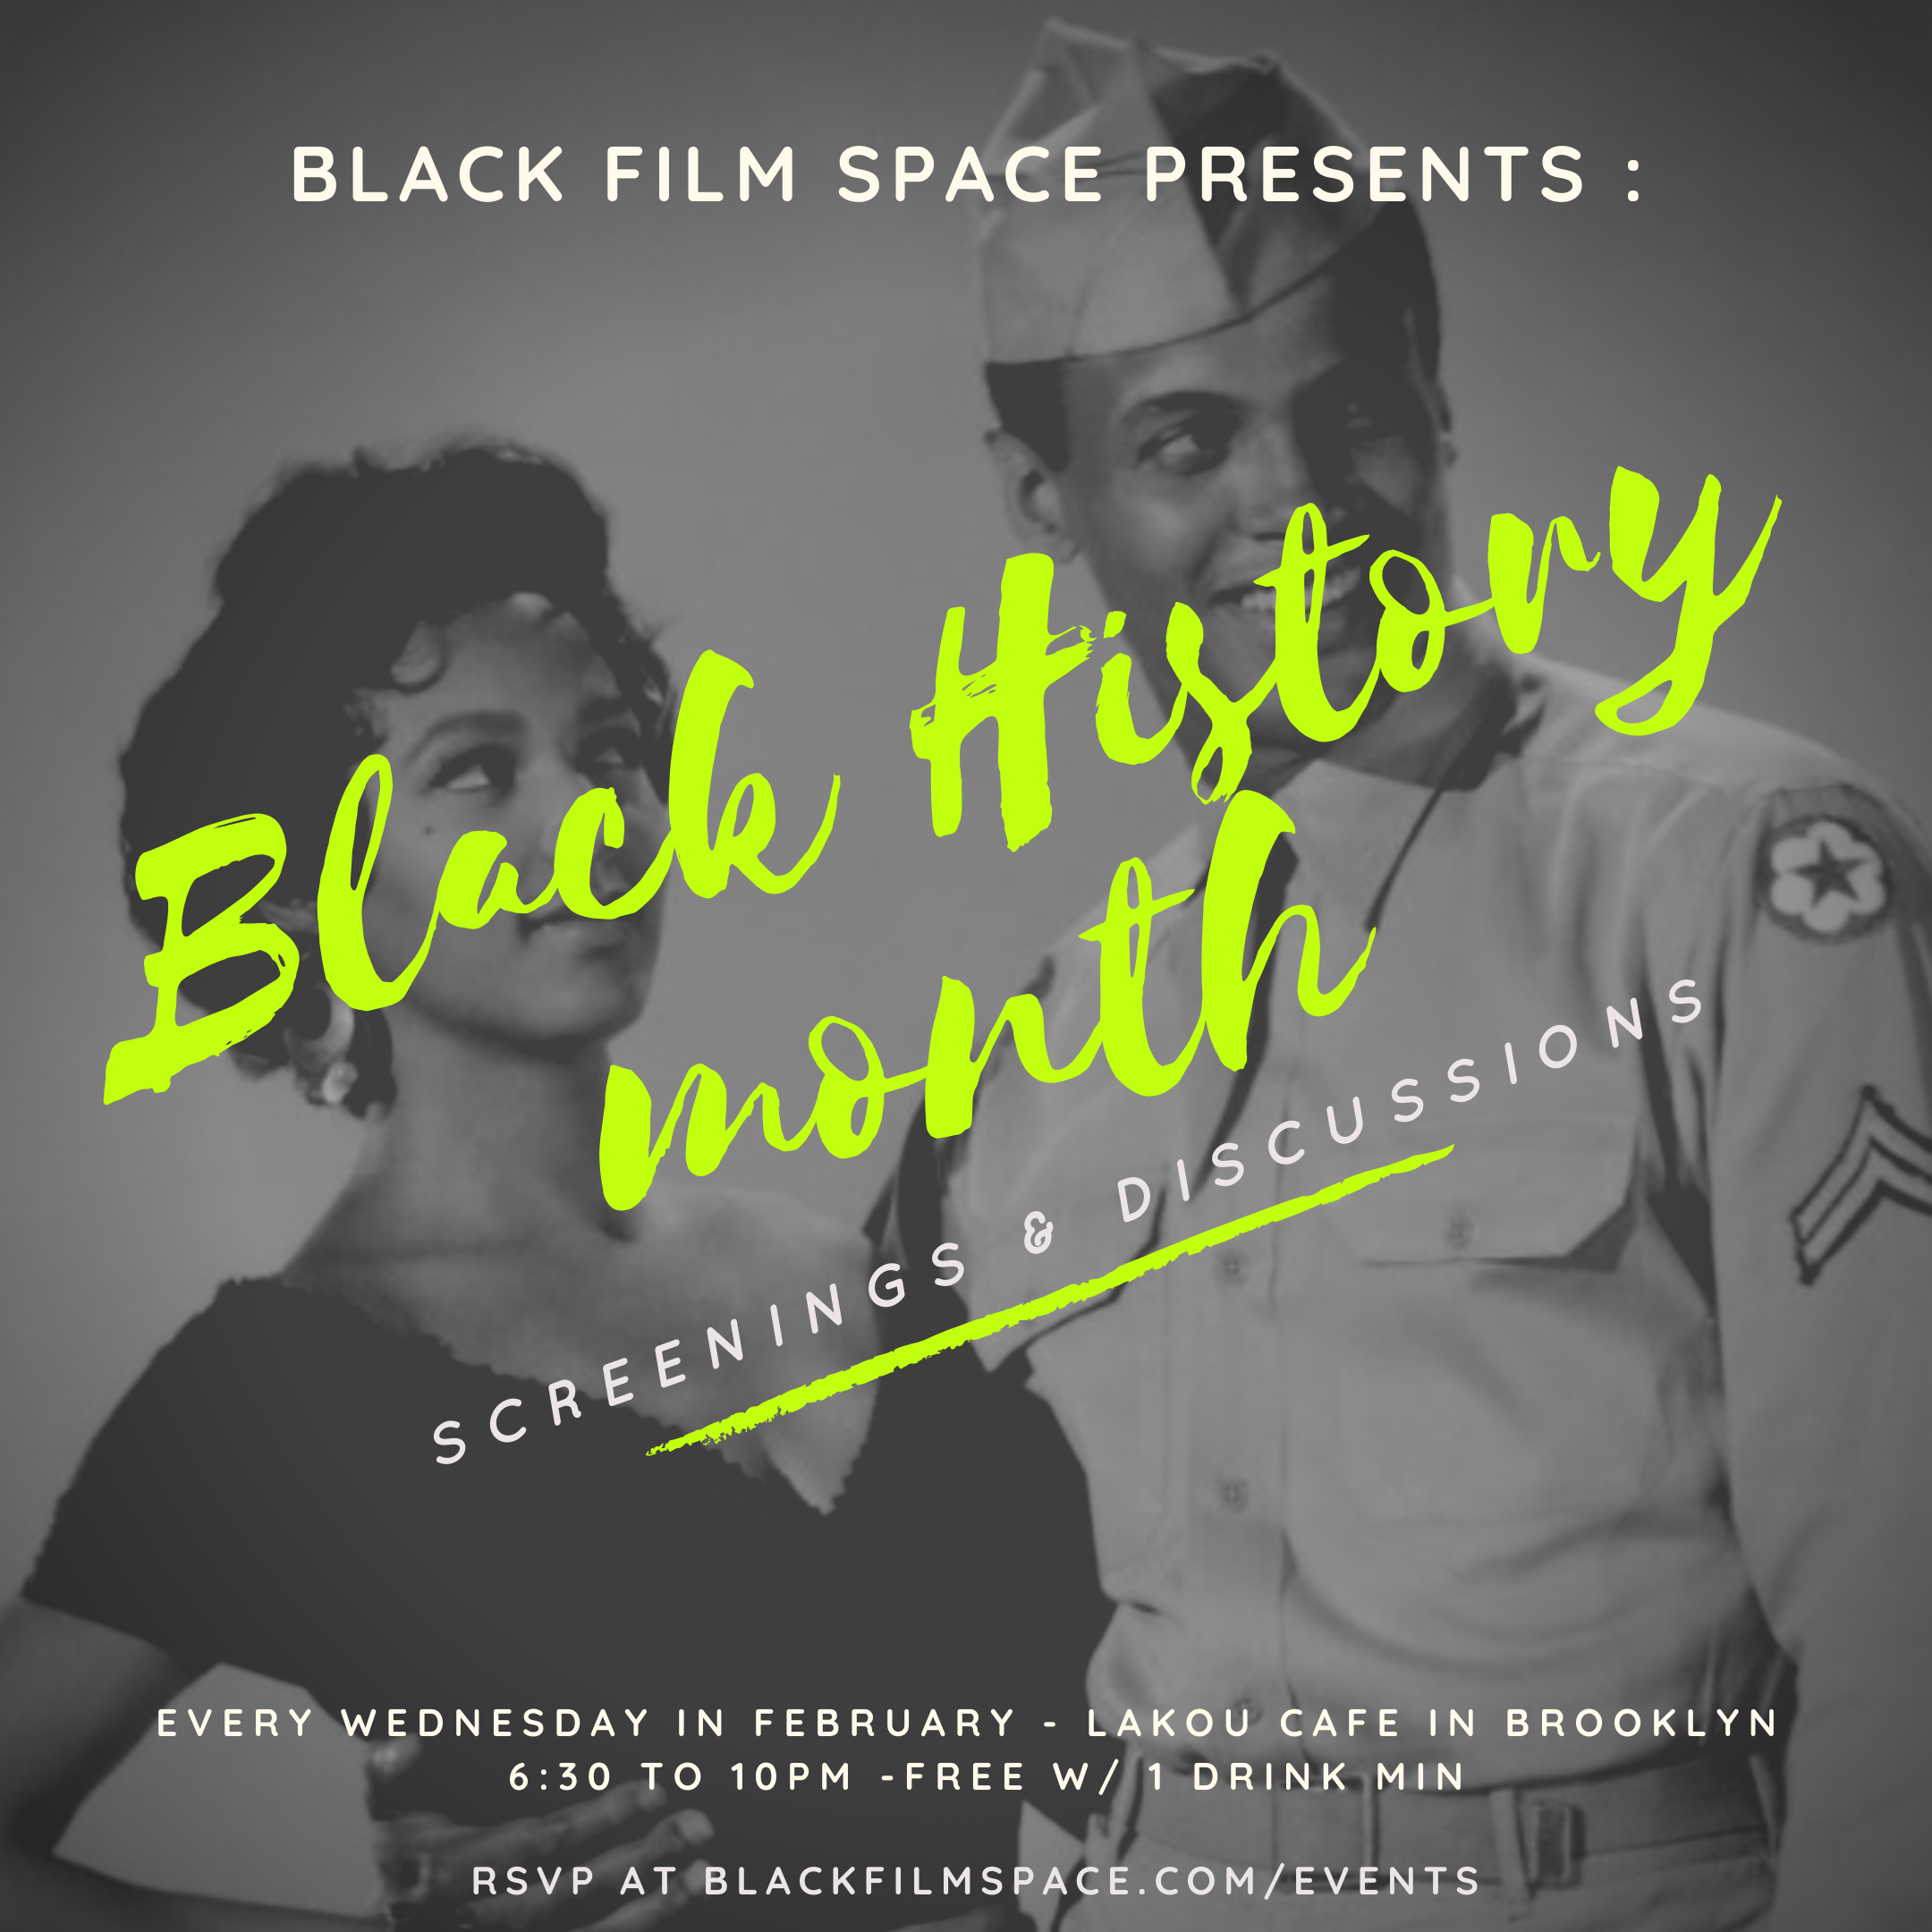 Black Film Space: Black History Month Screenings & Discussions